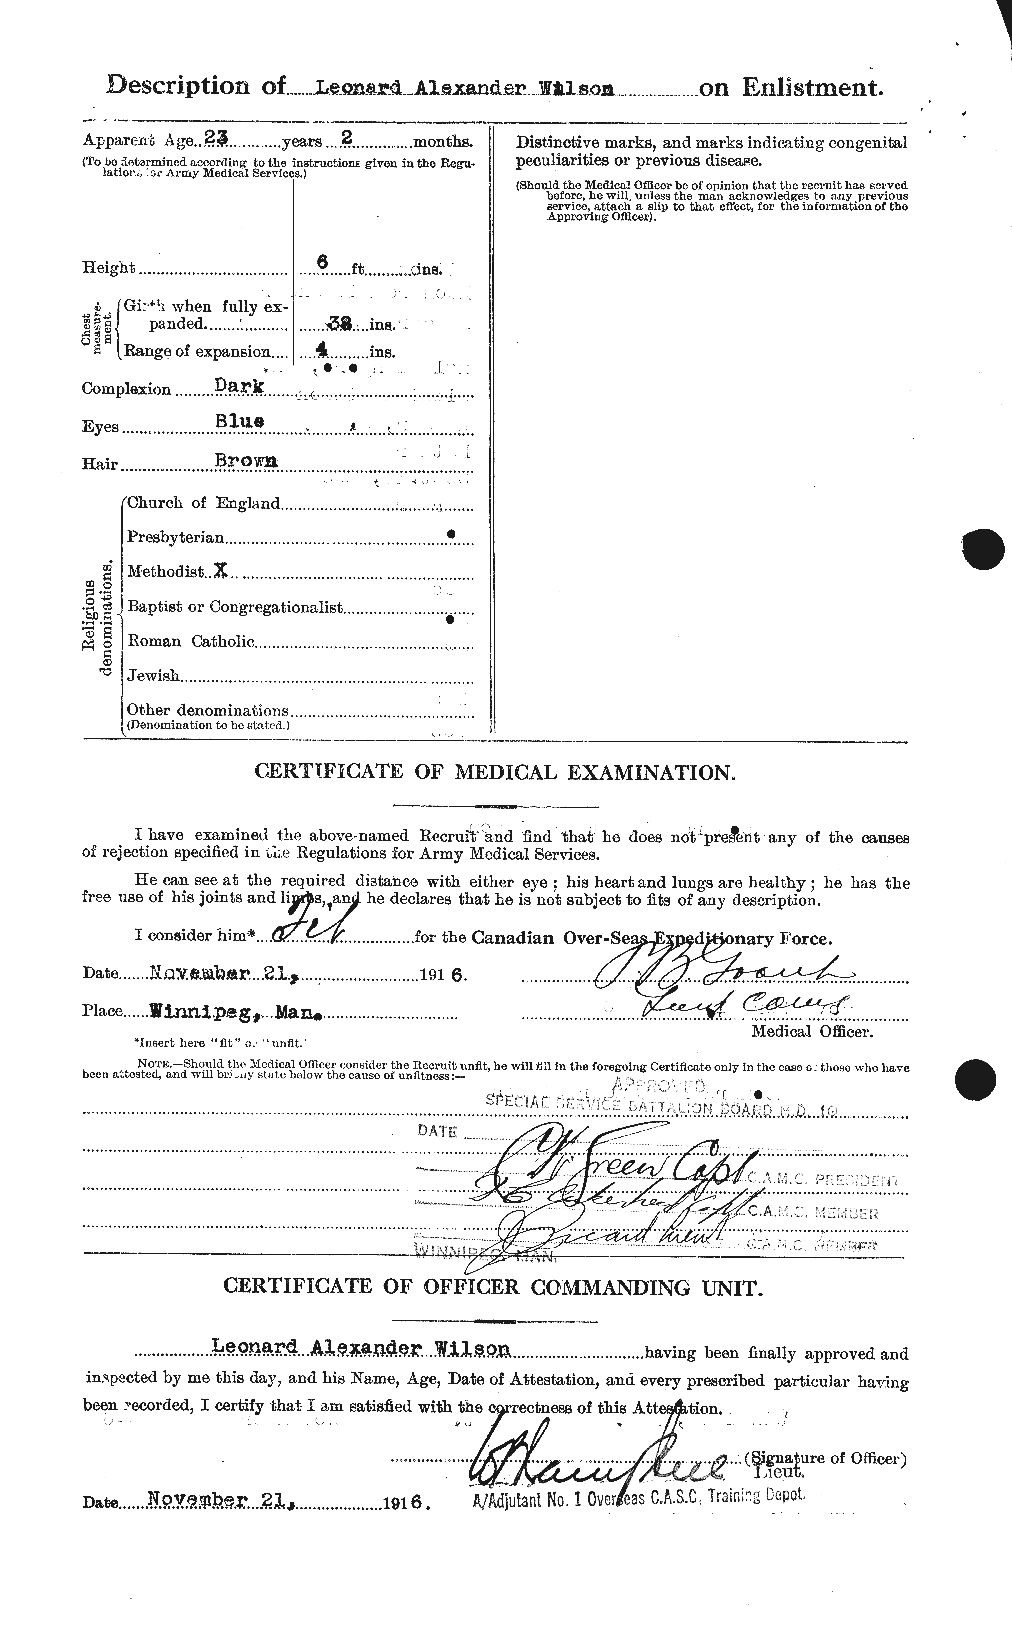 Personnel Records of the First World War - CEF 678636b